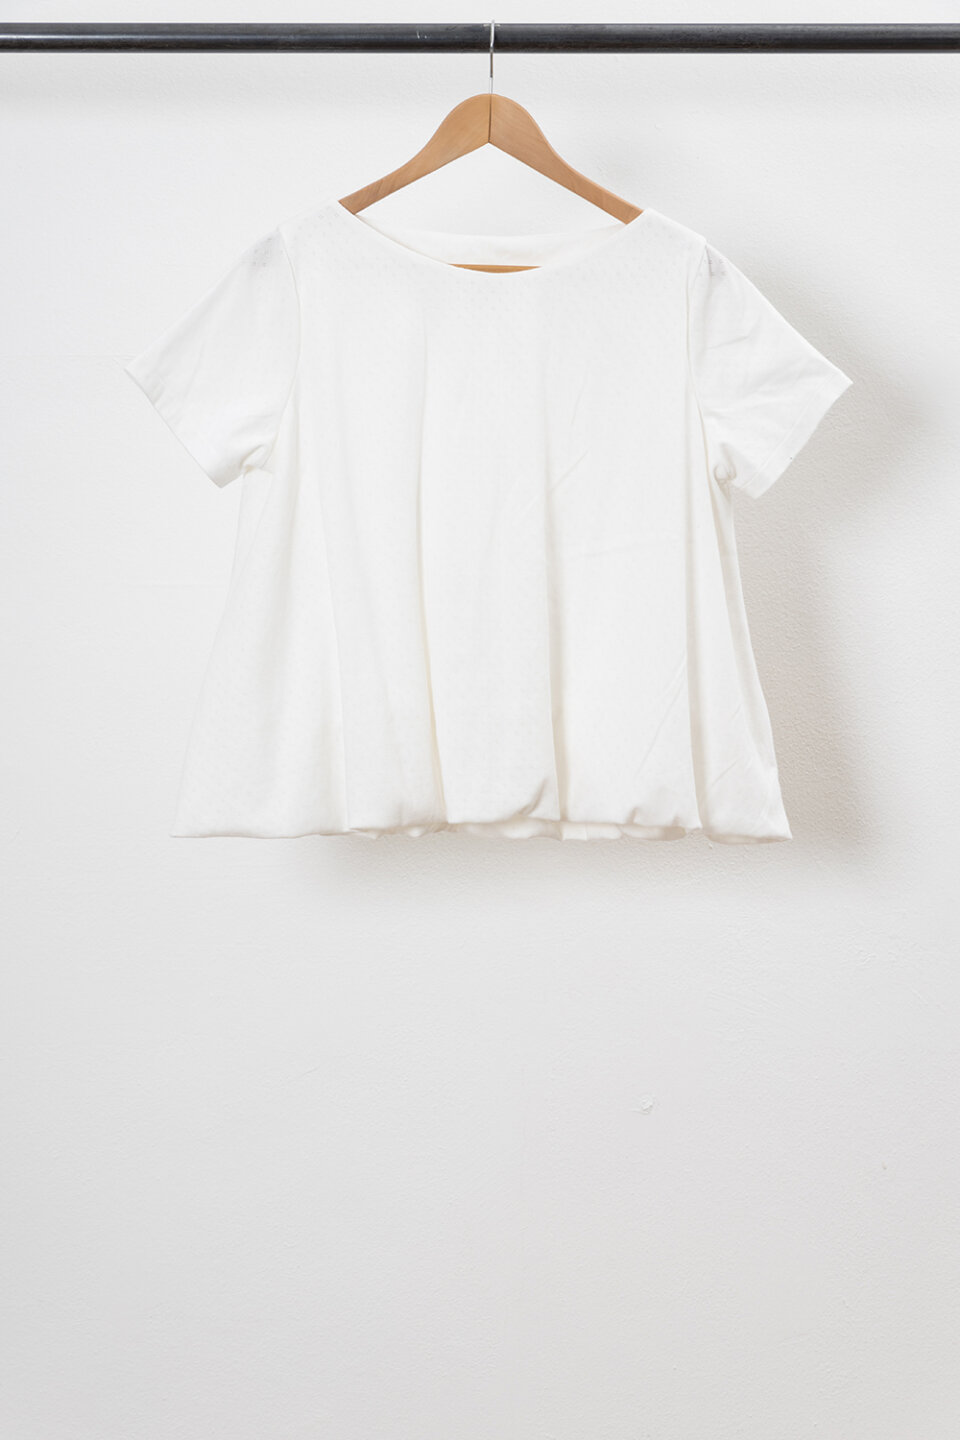 T shirt FrouFrou bco 1 - Officinae